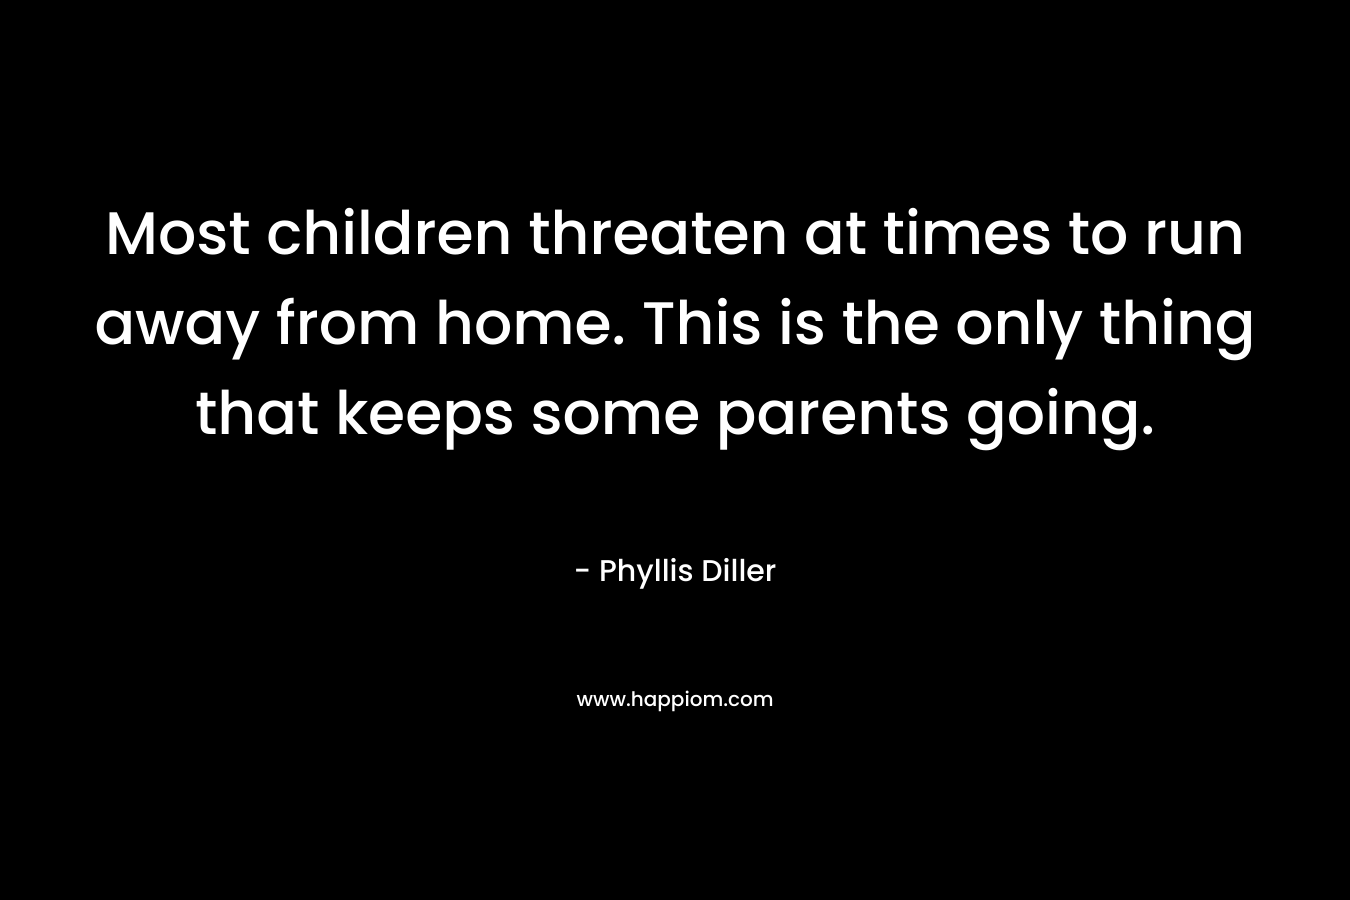 Most children threaten at times to run away from home. This is the only thing that keeps some parents going. – Phyllis Diller